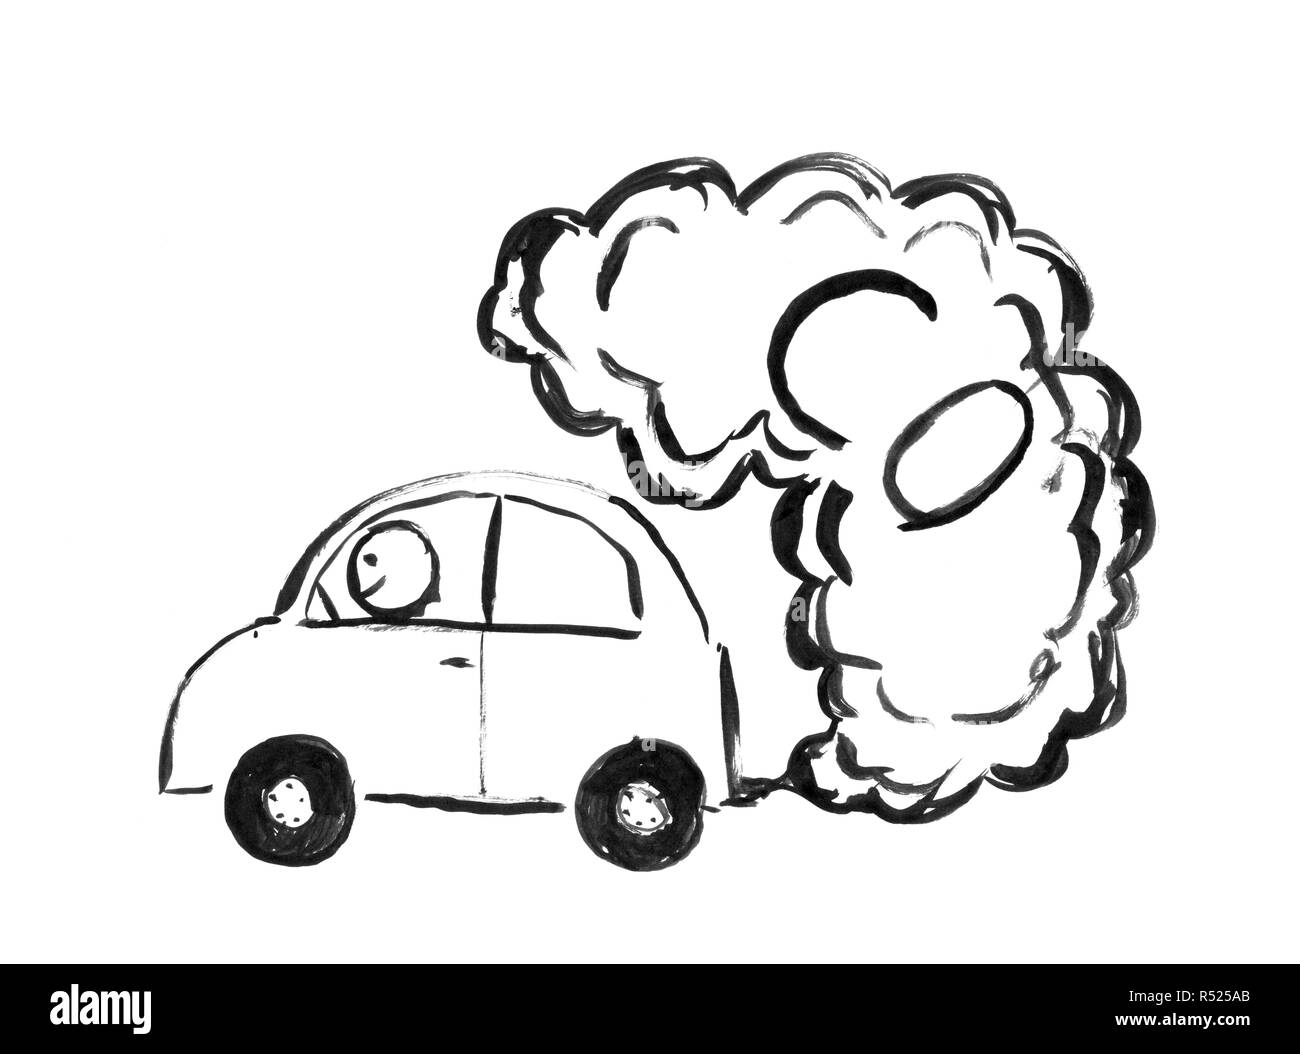 Black Ink Hand Drawing of Car Producing CO Air Pollution Stock Photo